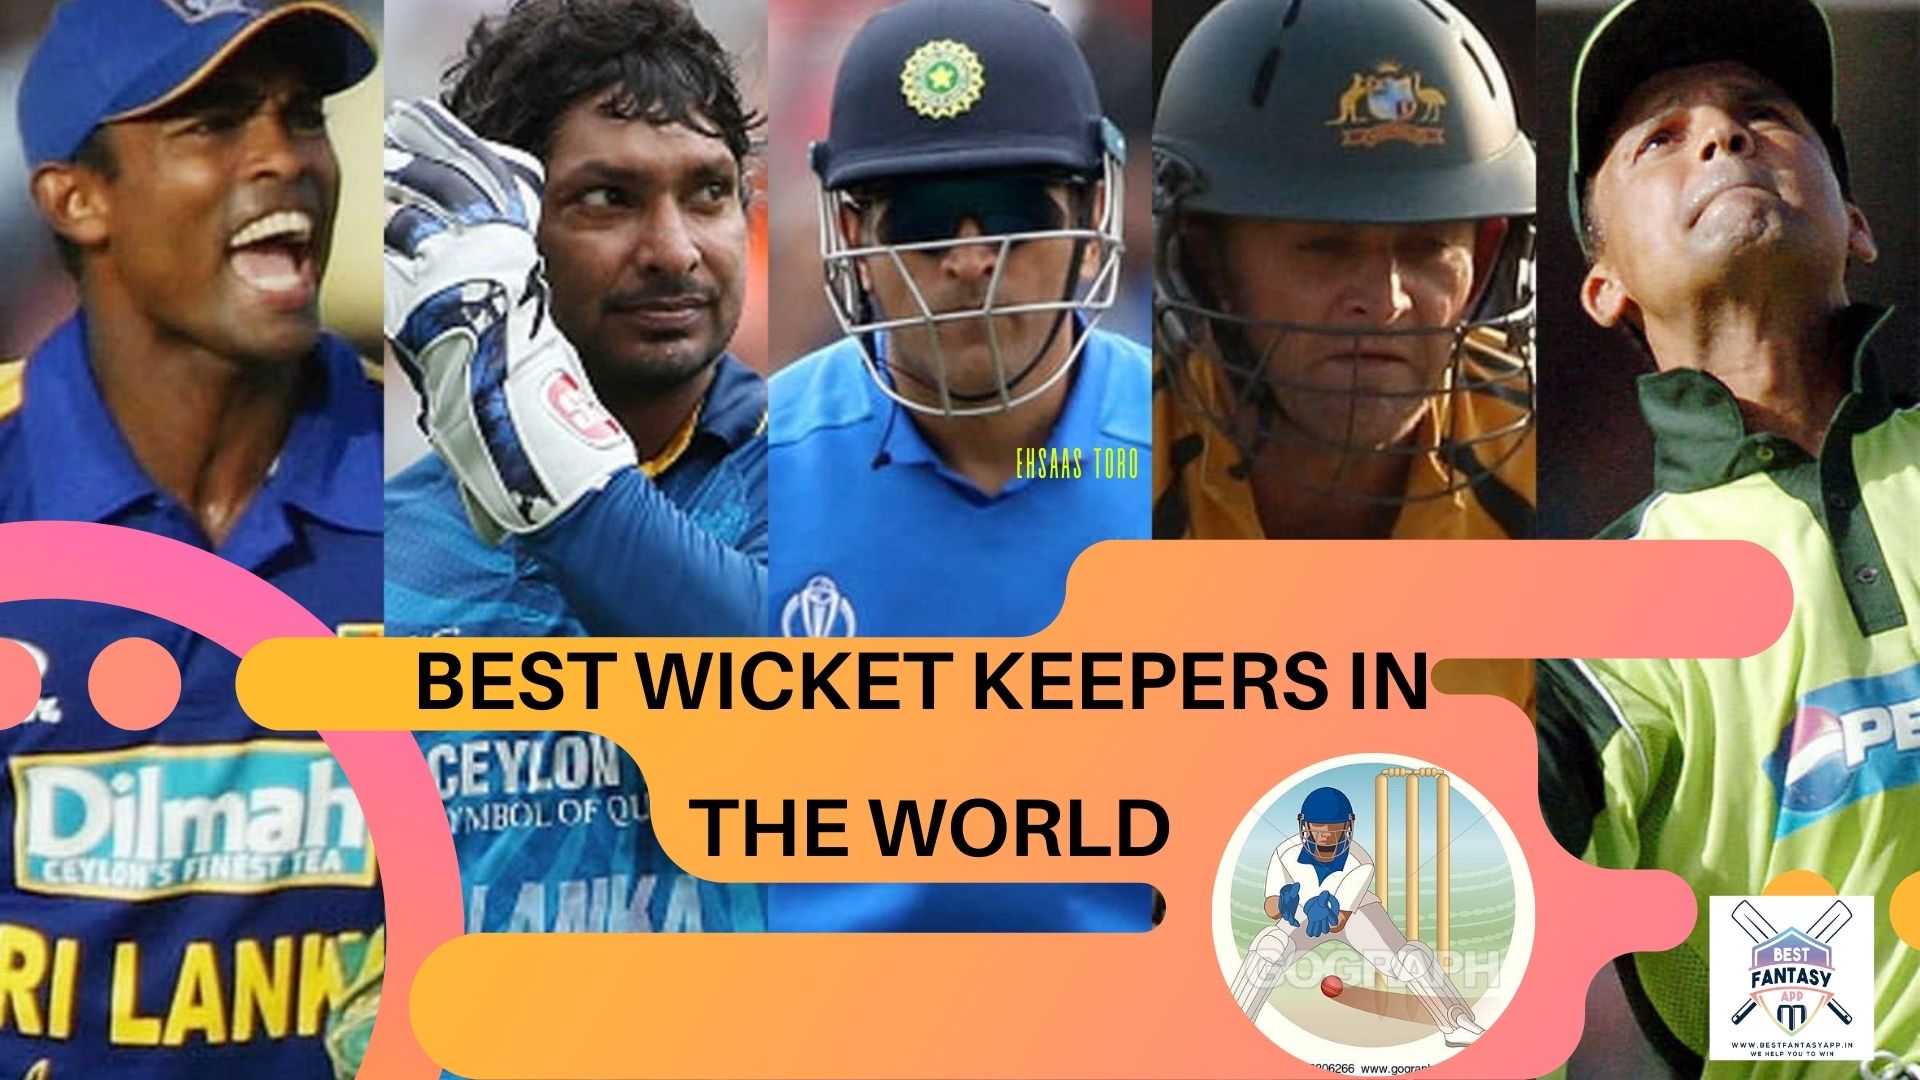 Top 10 BEST WICKET KEEPERS IN THE WORLD